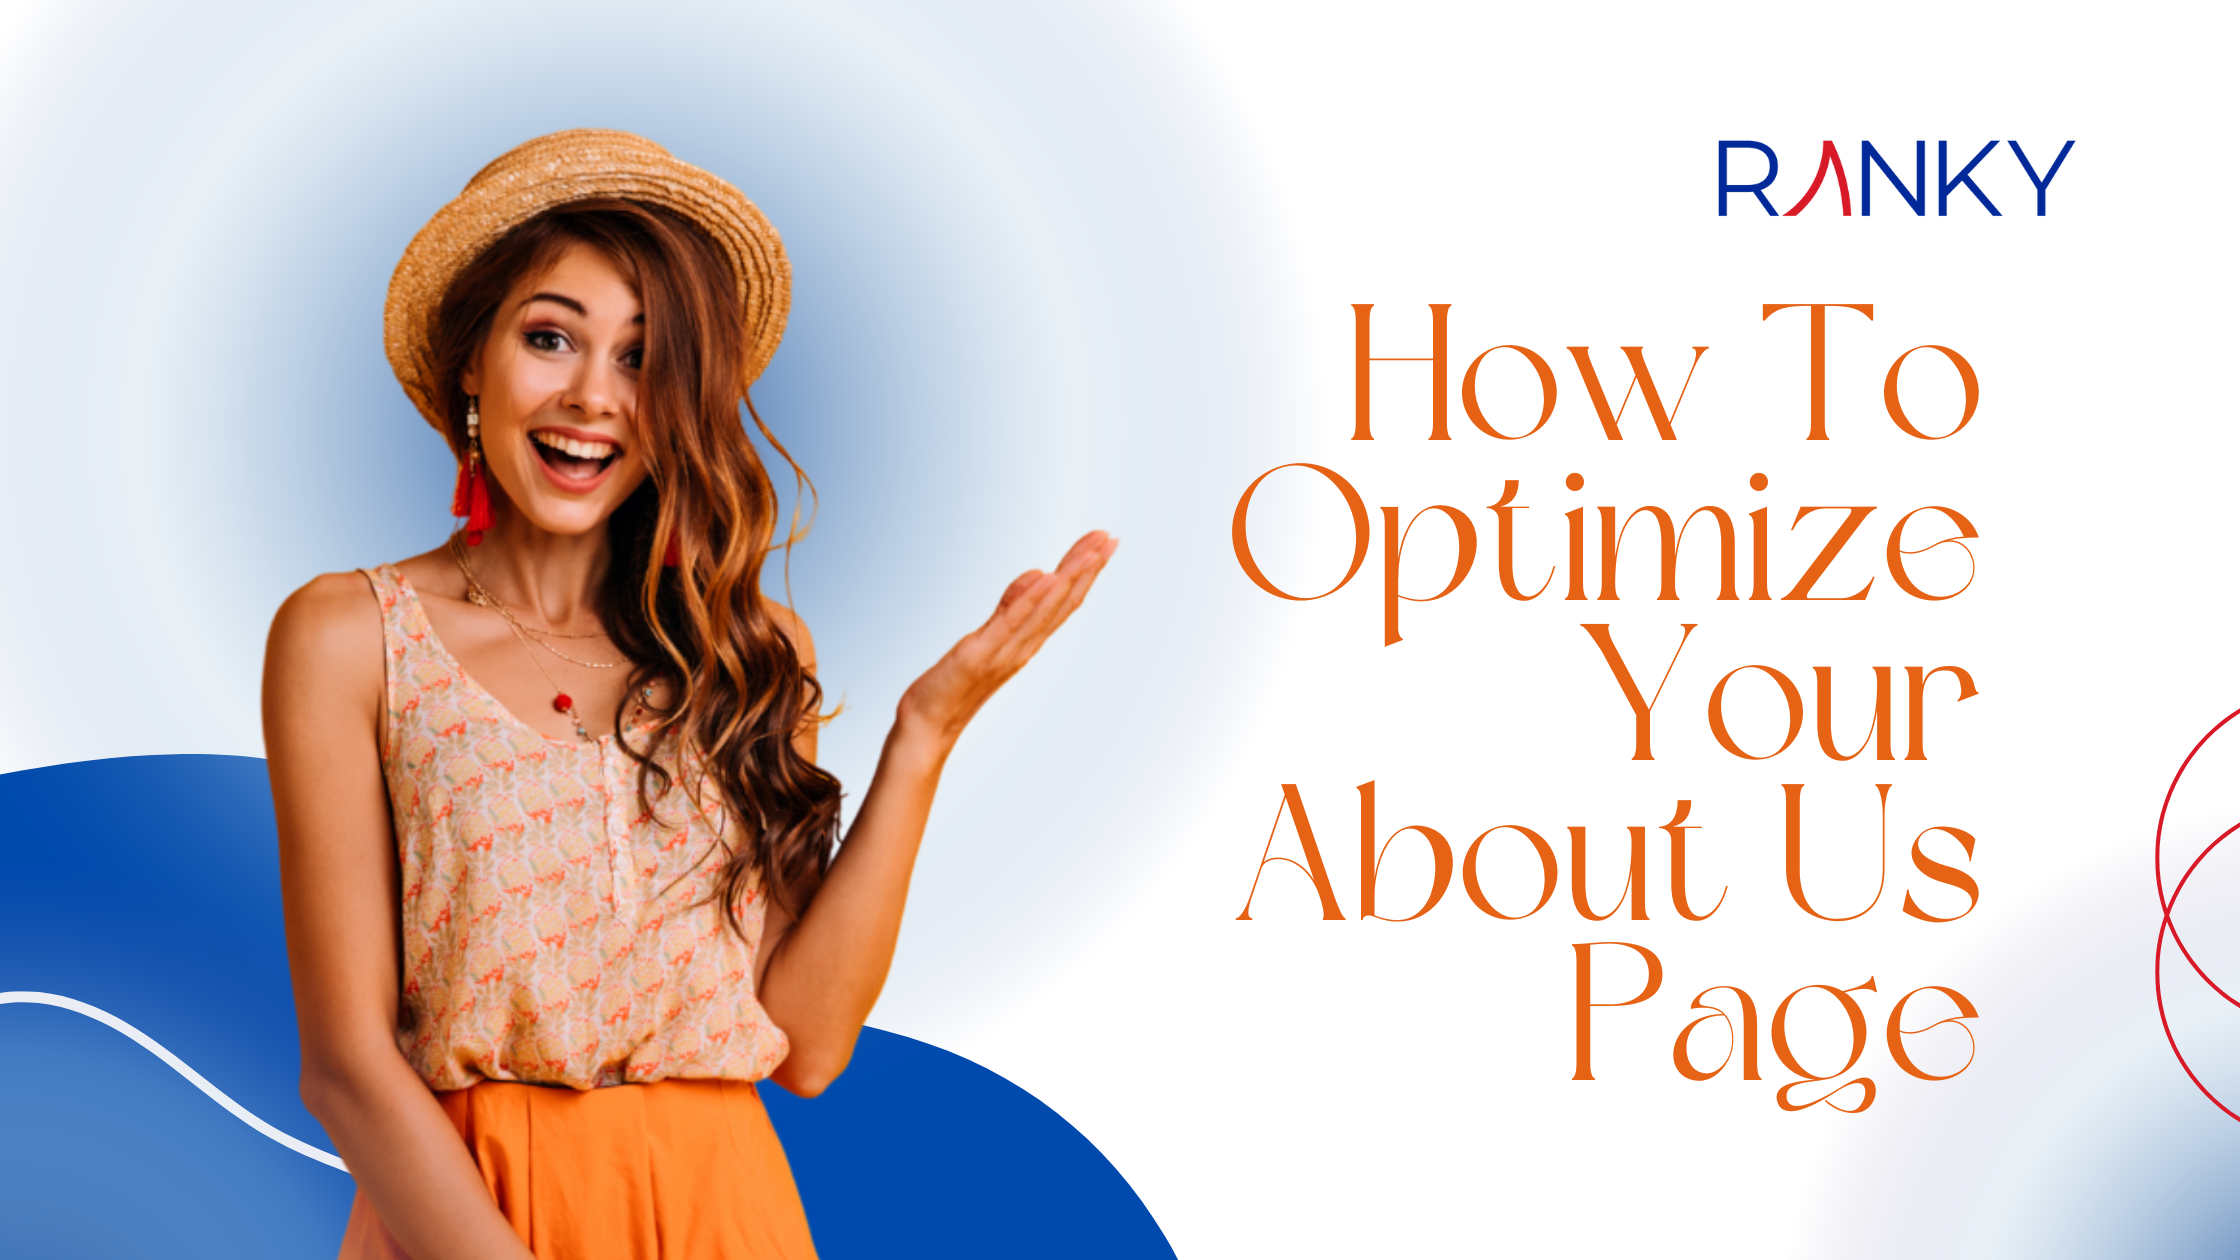 4 Ways To Optimize Your About Us Page